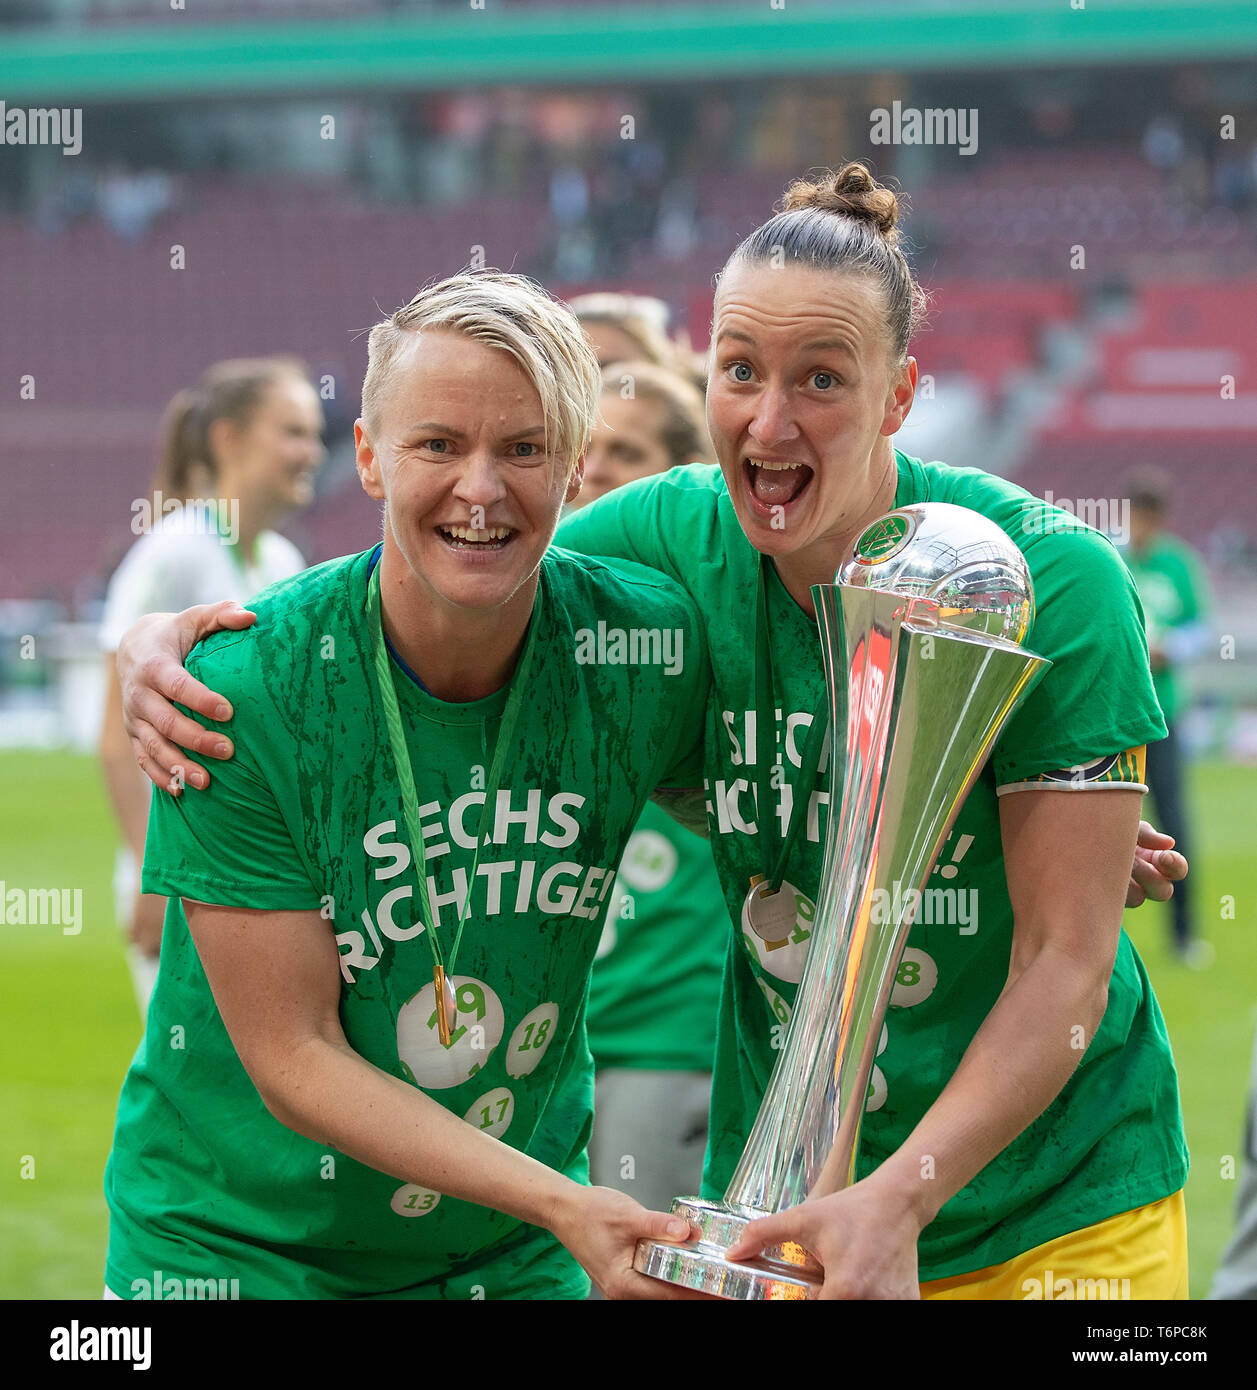 Page 13 - Vfl Wolfsburg Goalkeeper High Resolution Stock Photography and  Images - Alamy